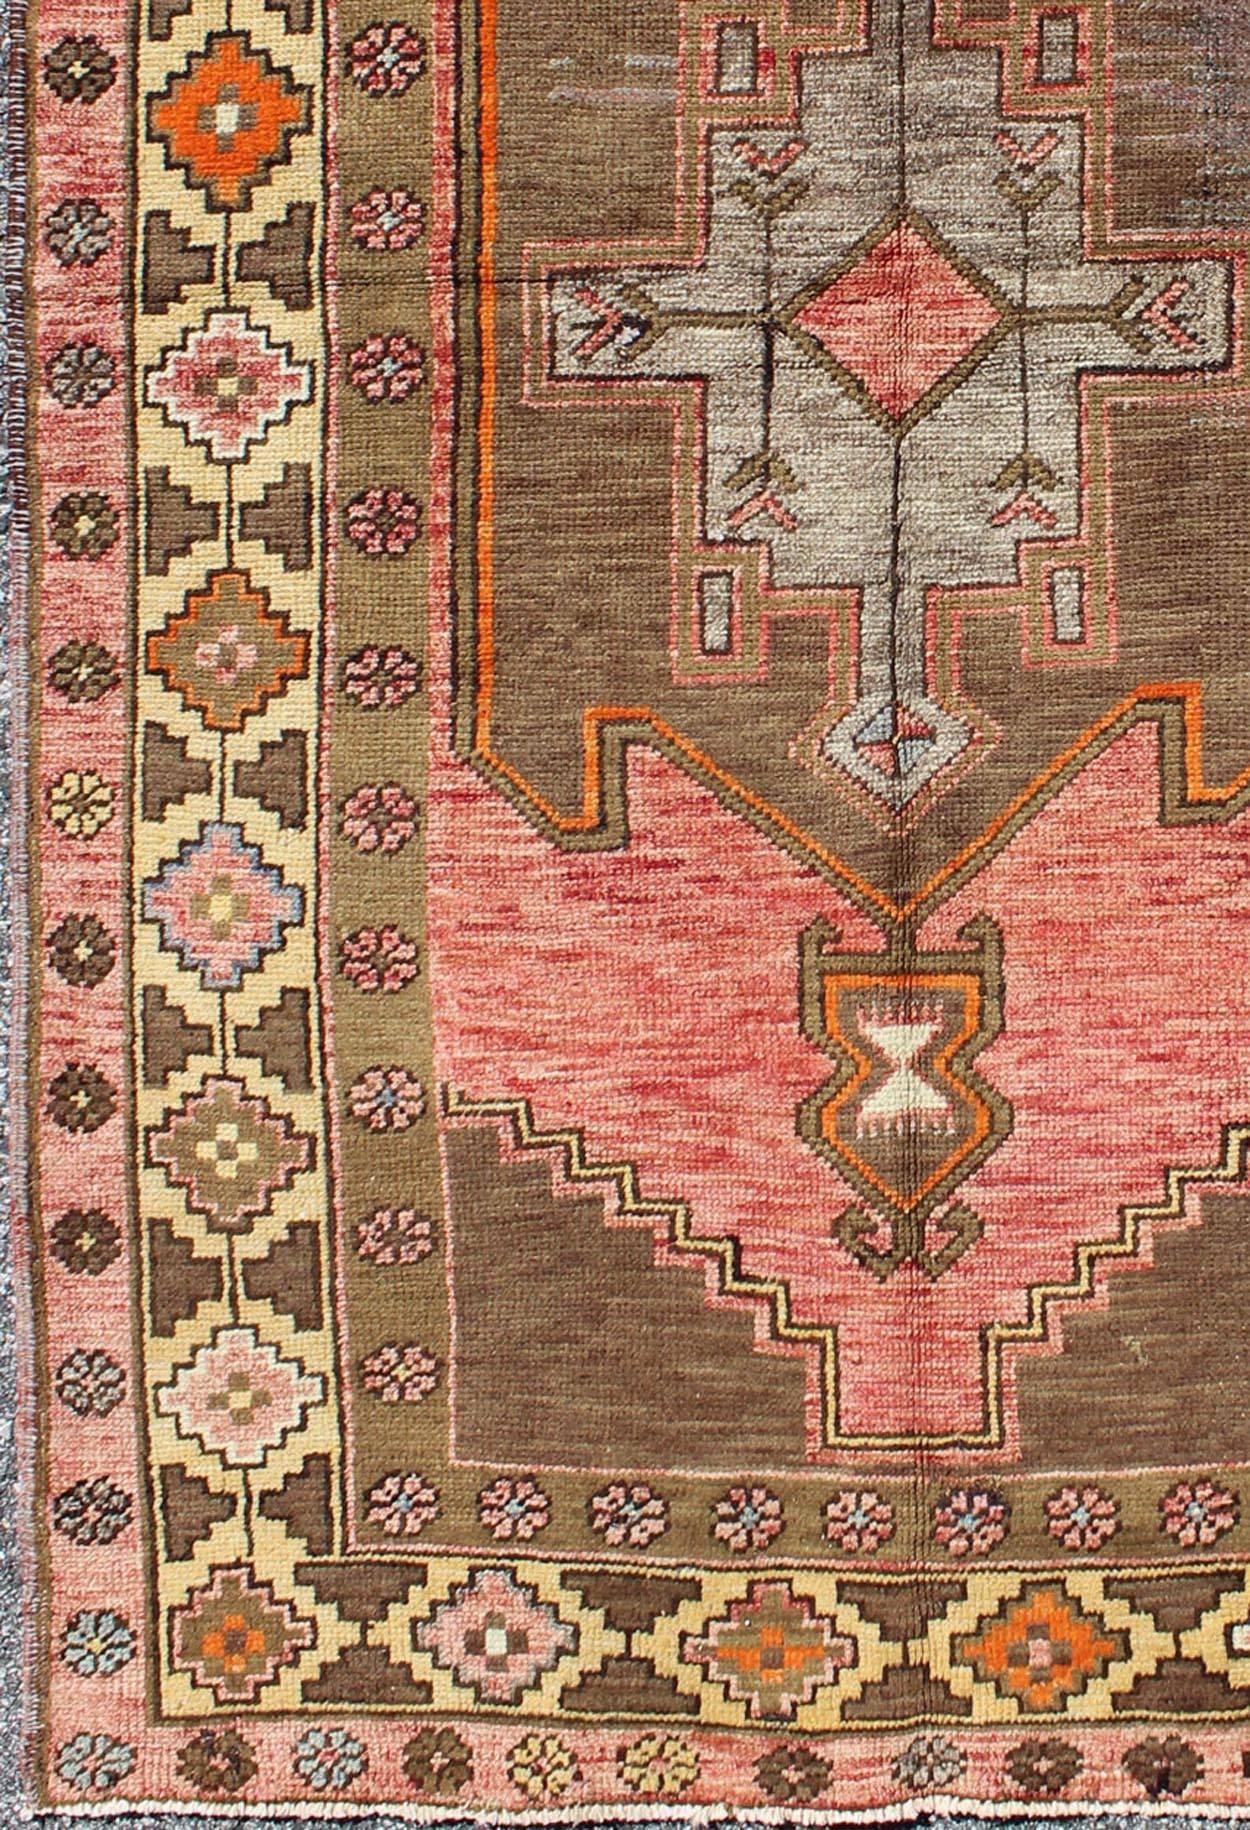 Midcentury vintage Turkish Oushak rug with geometric florals in red and brown, rug dur-3459, country of origin / type: Turkey / Oushak, circa mid-20th century

This vintage Turkish Oushak carpet (circa mid-20th century) features a unique central